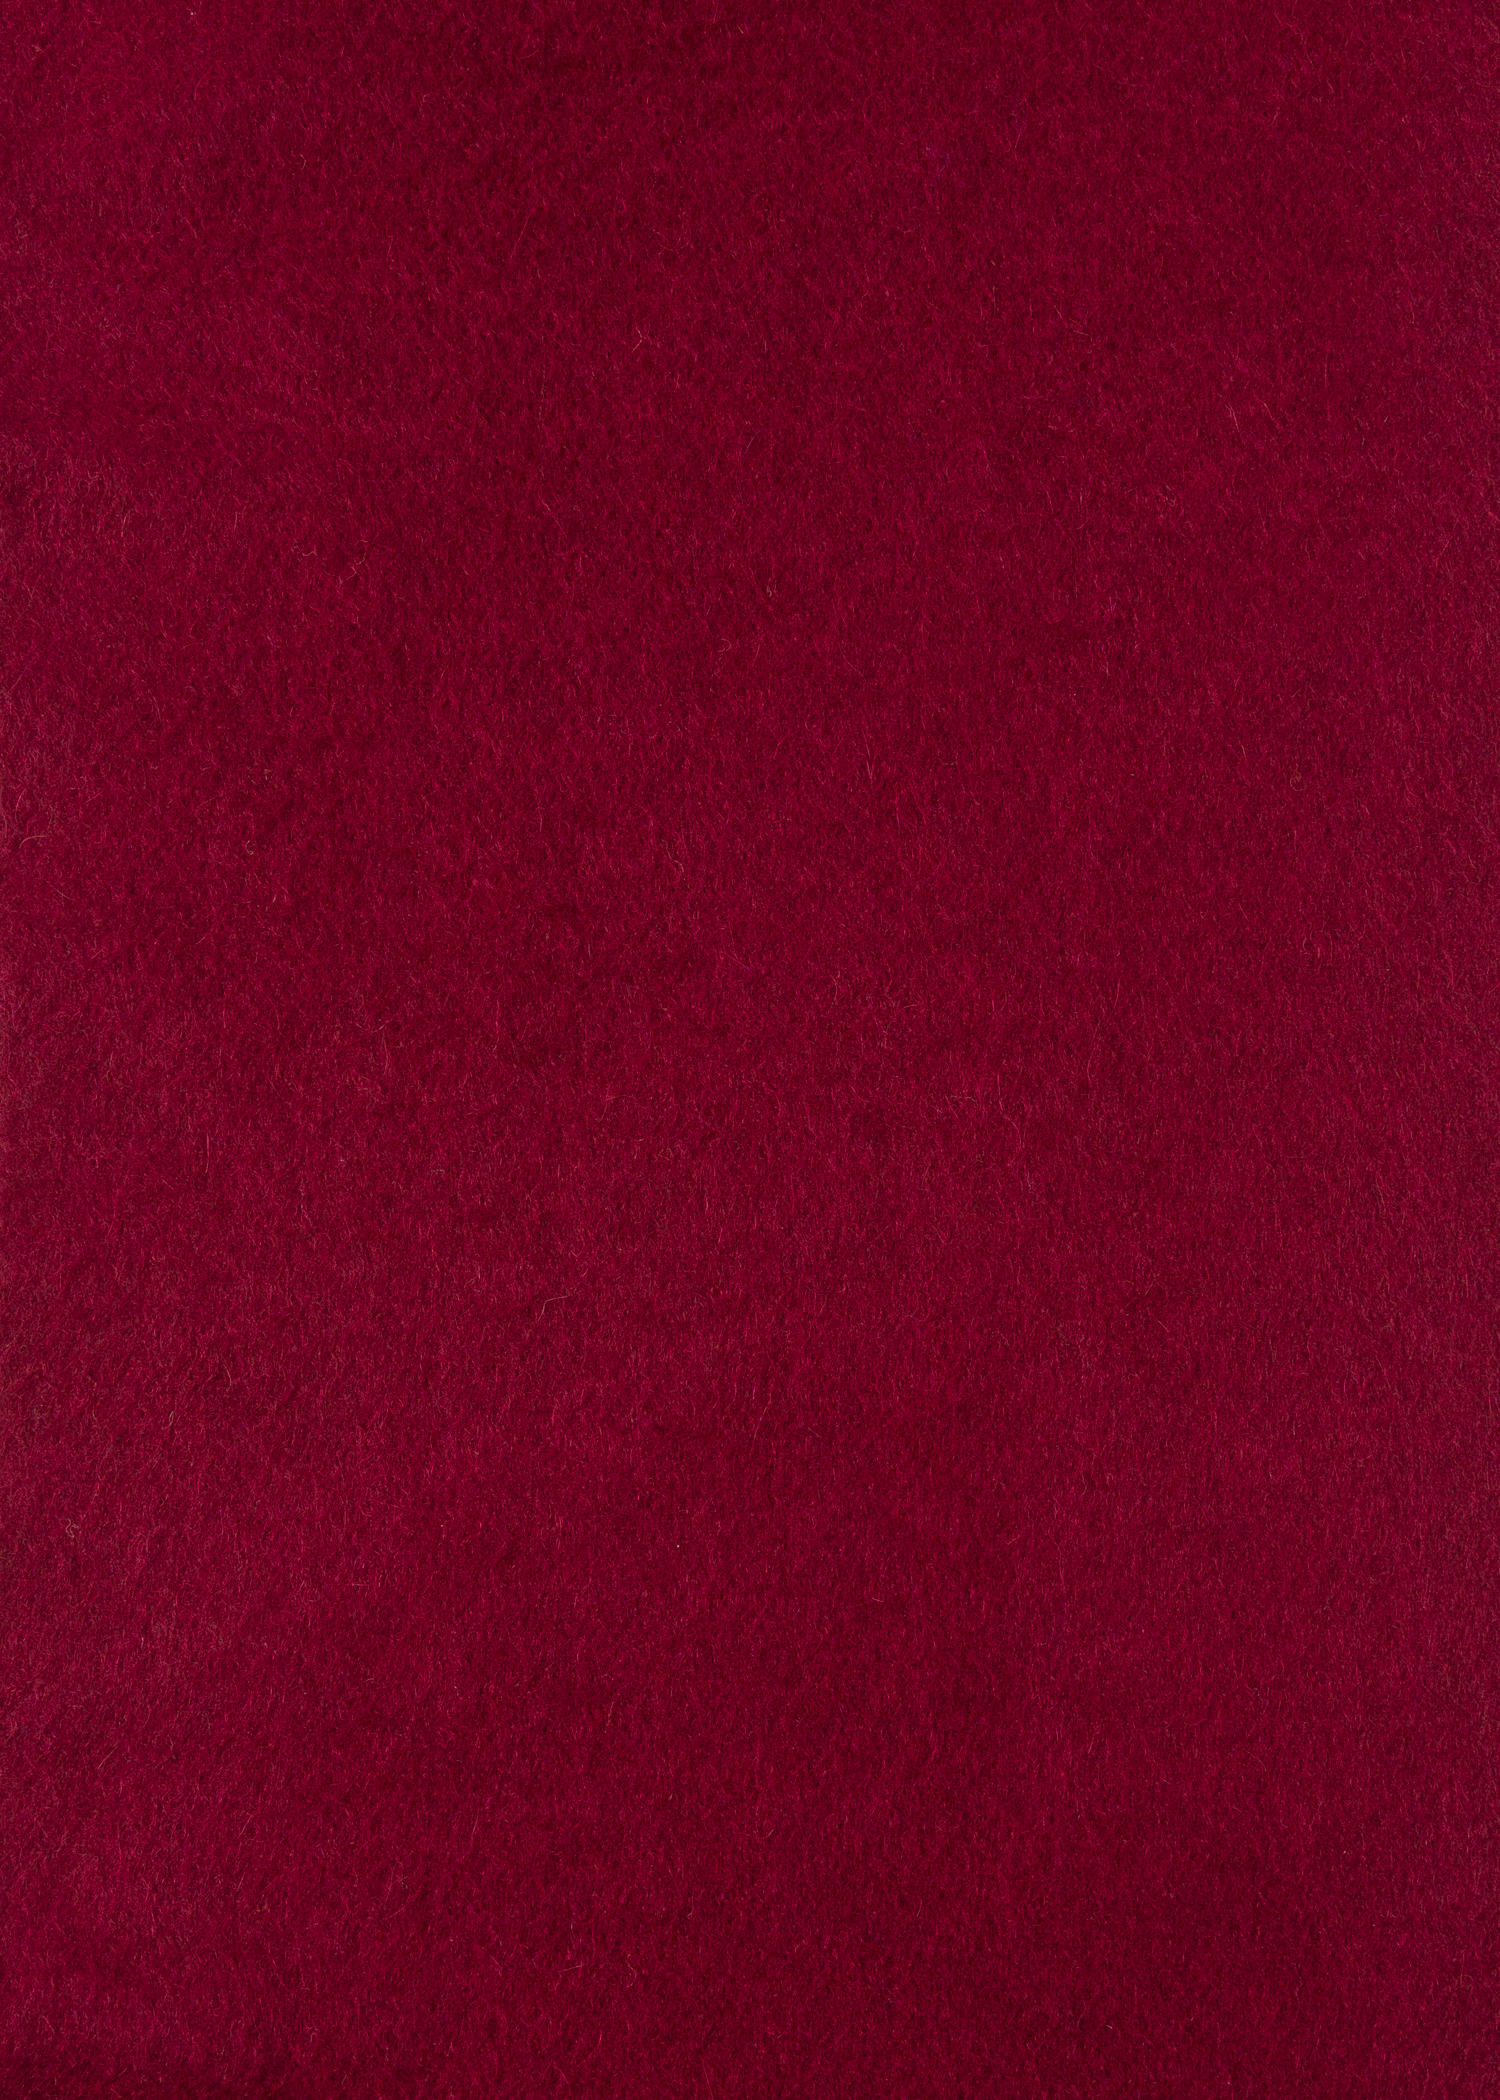 Detail view - Burgundy Cashmere Scarf Paul Smith